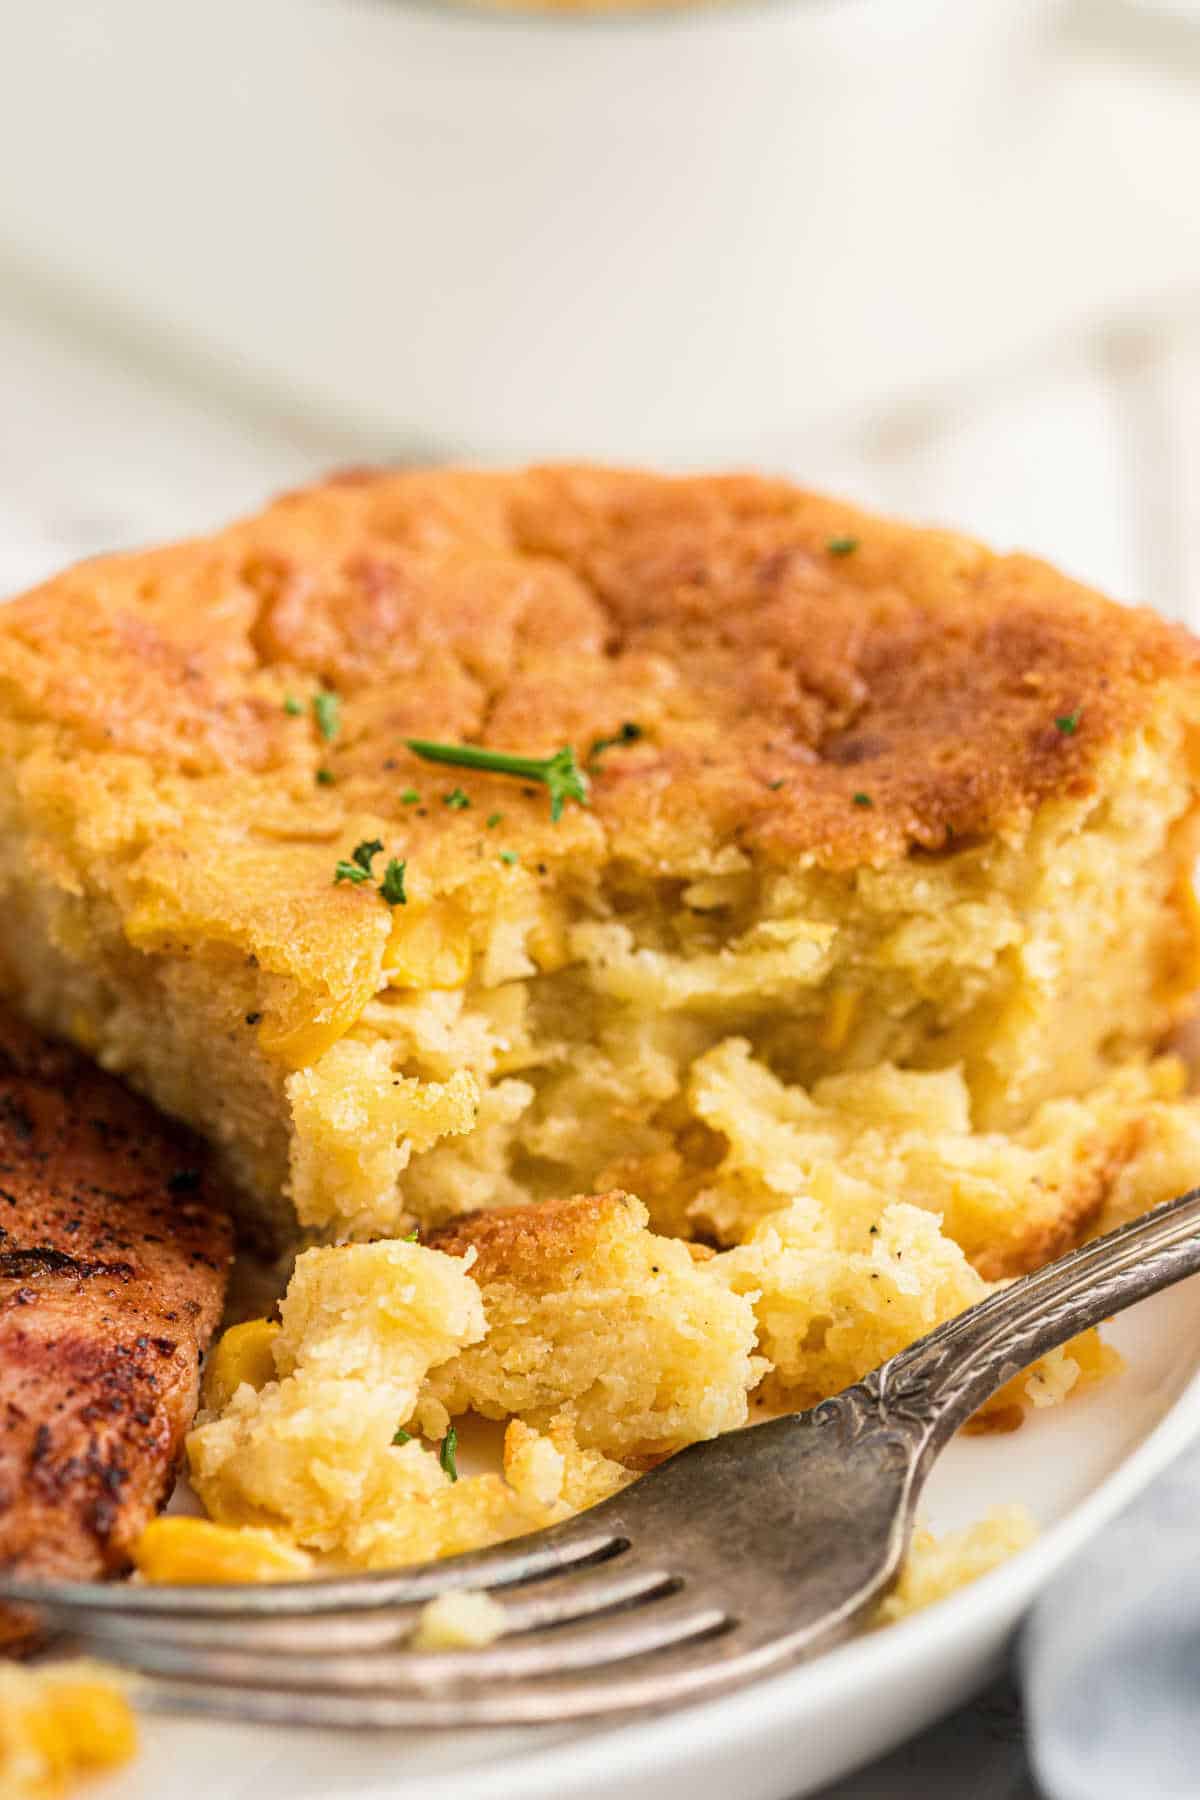 Close up of a dished up serving of cornbread pudding with a fork resting next to it.